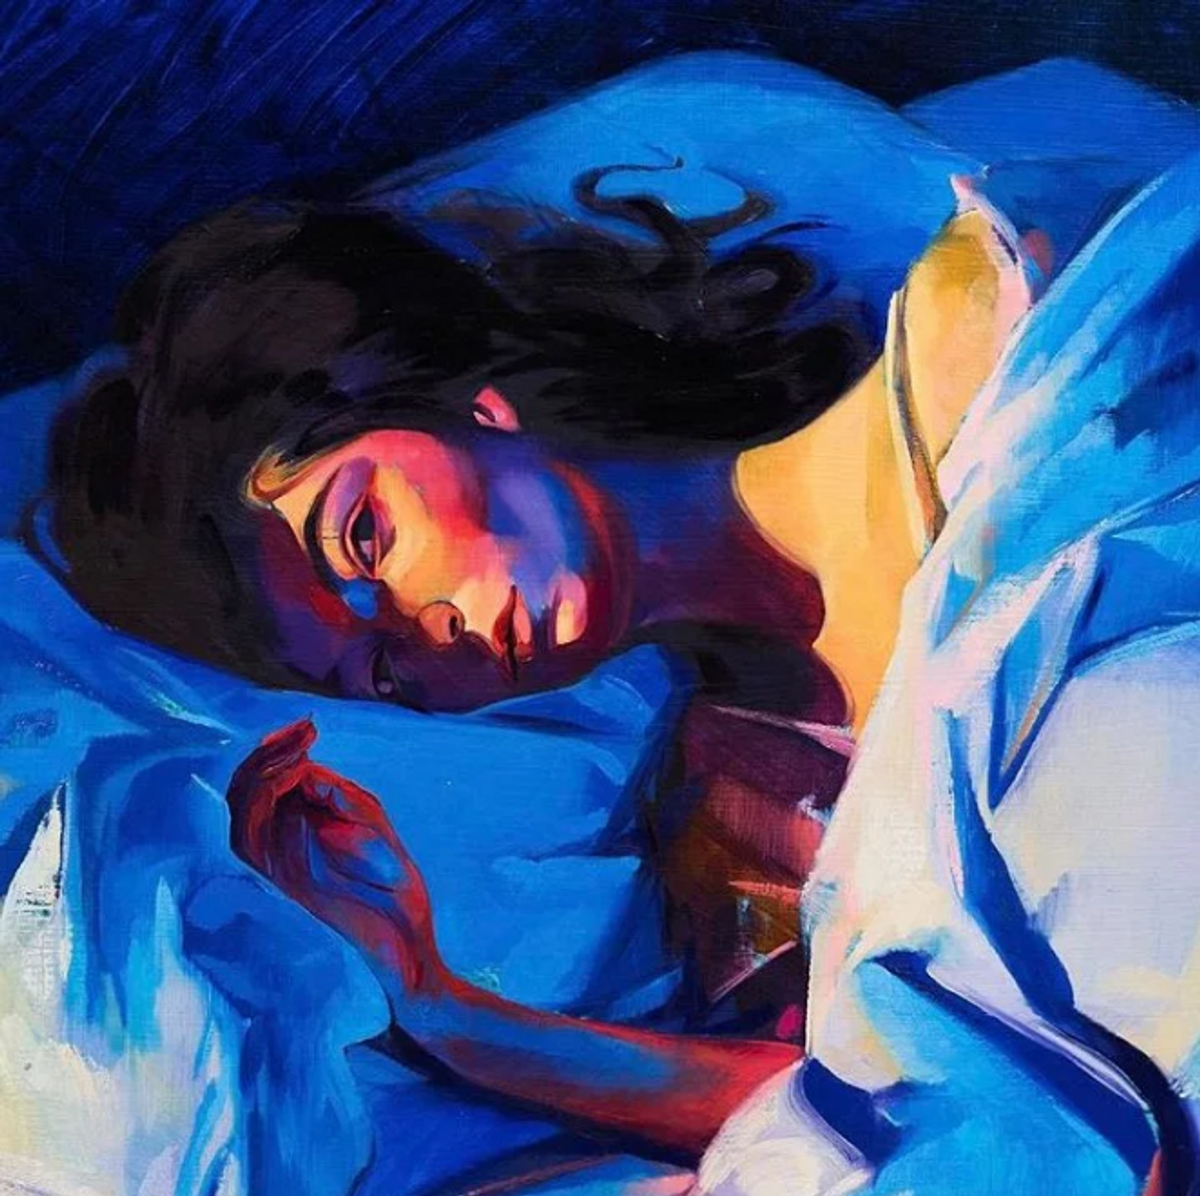 Why You Need To Listen To Lorde's New Music